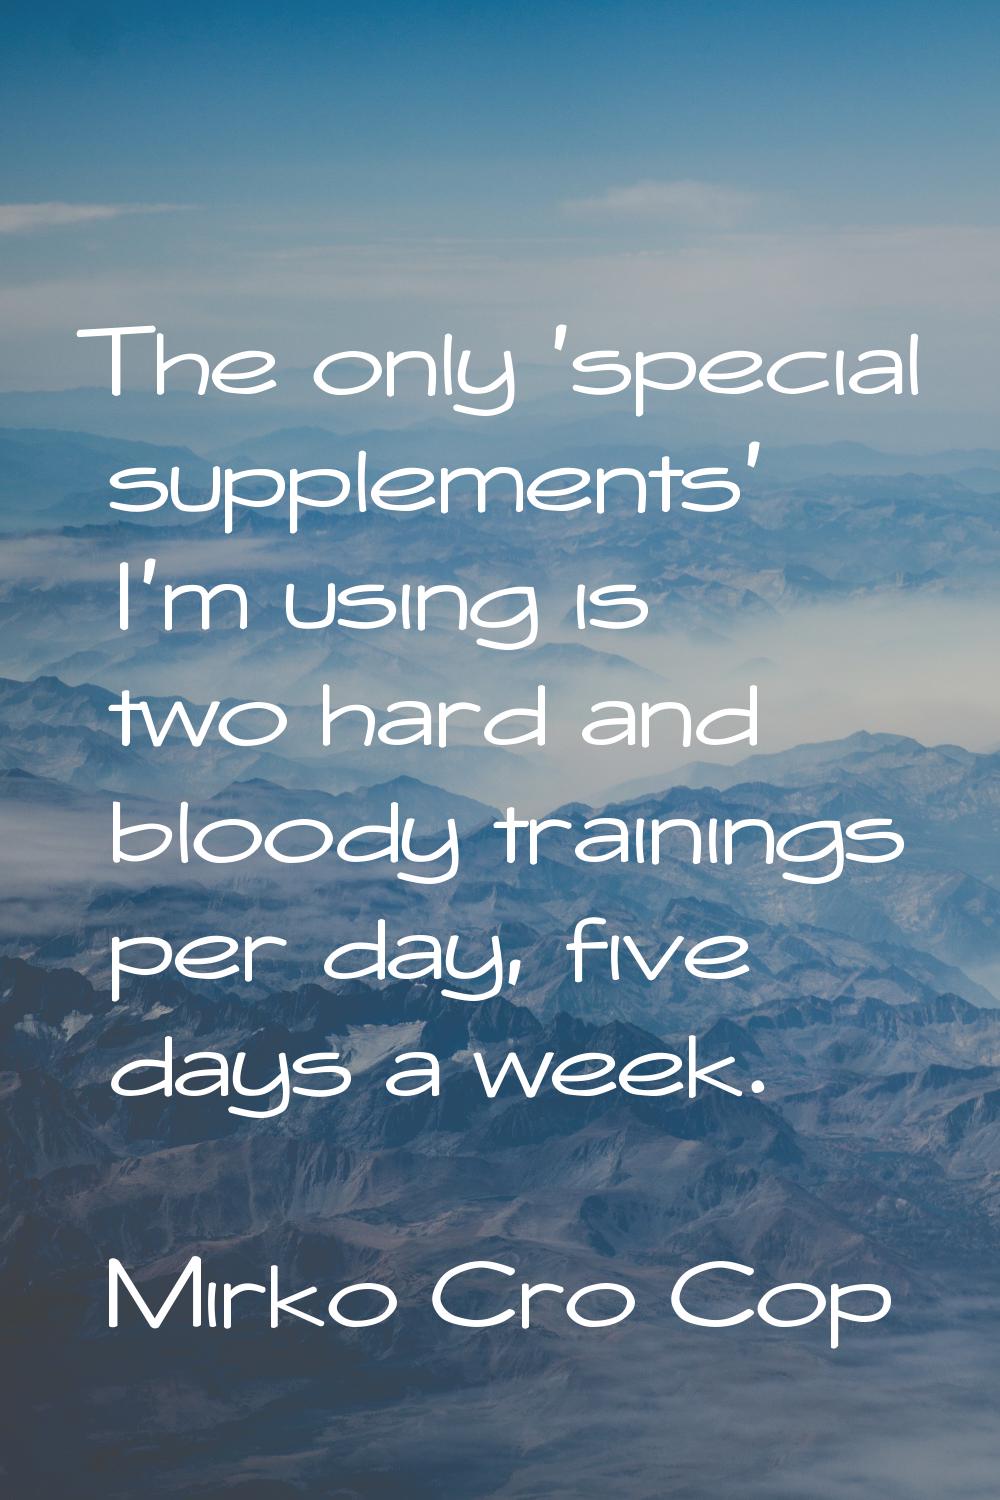 The only 'special supplements' I'm using is two hard and bloody trainings per day, five days a week